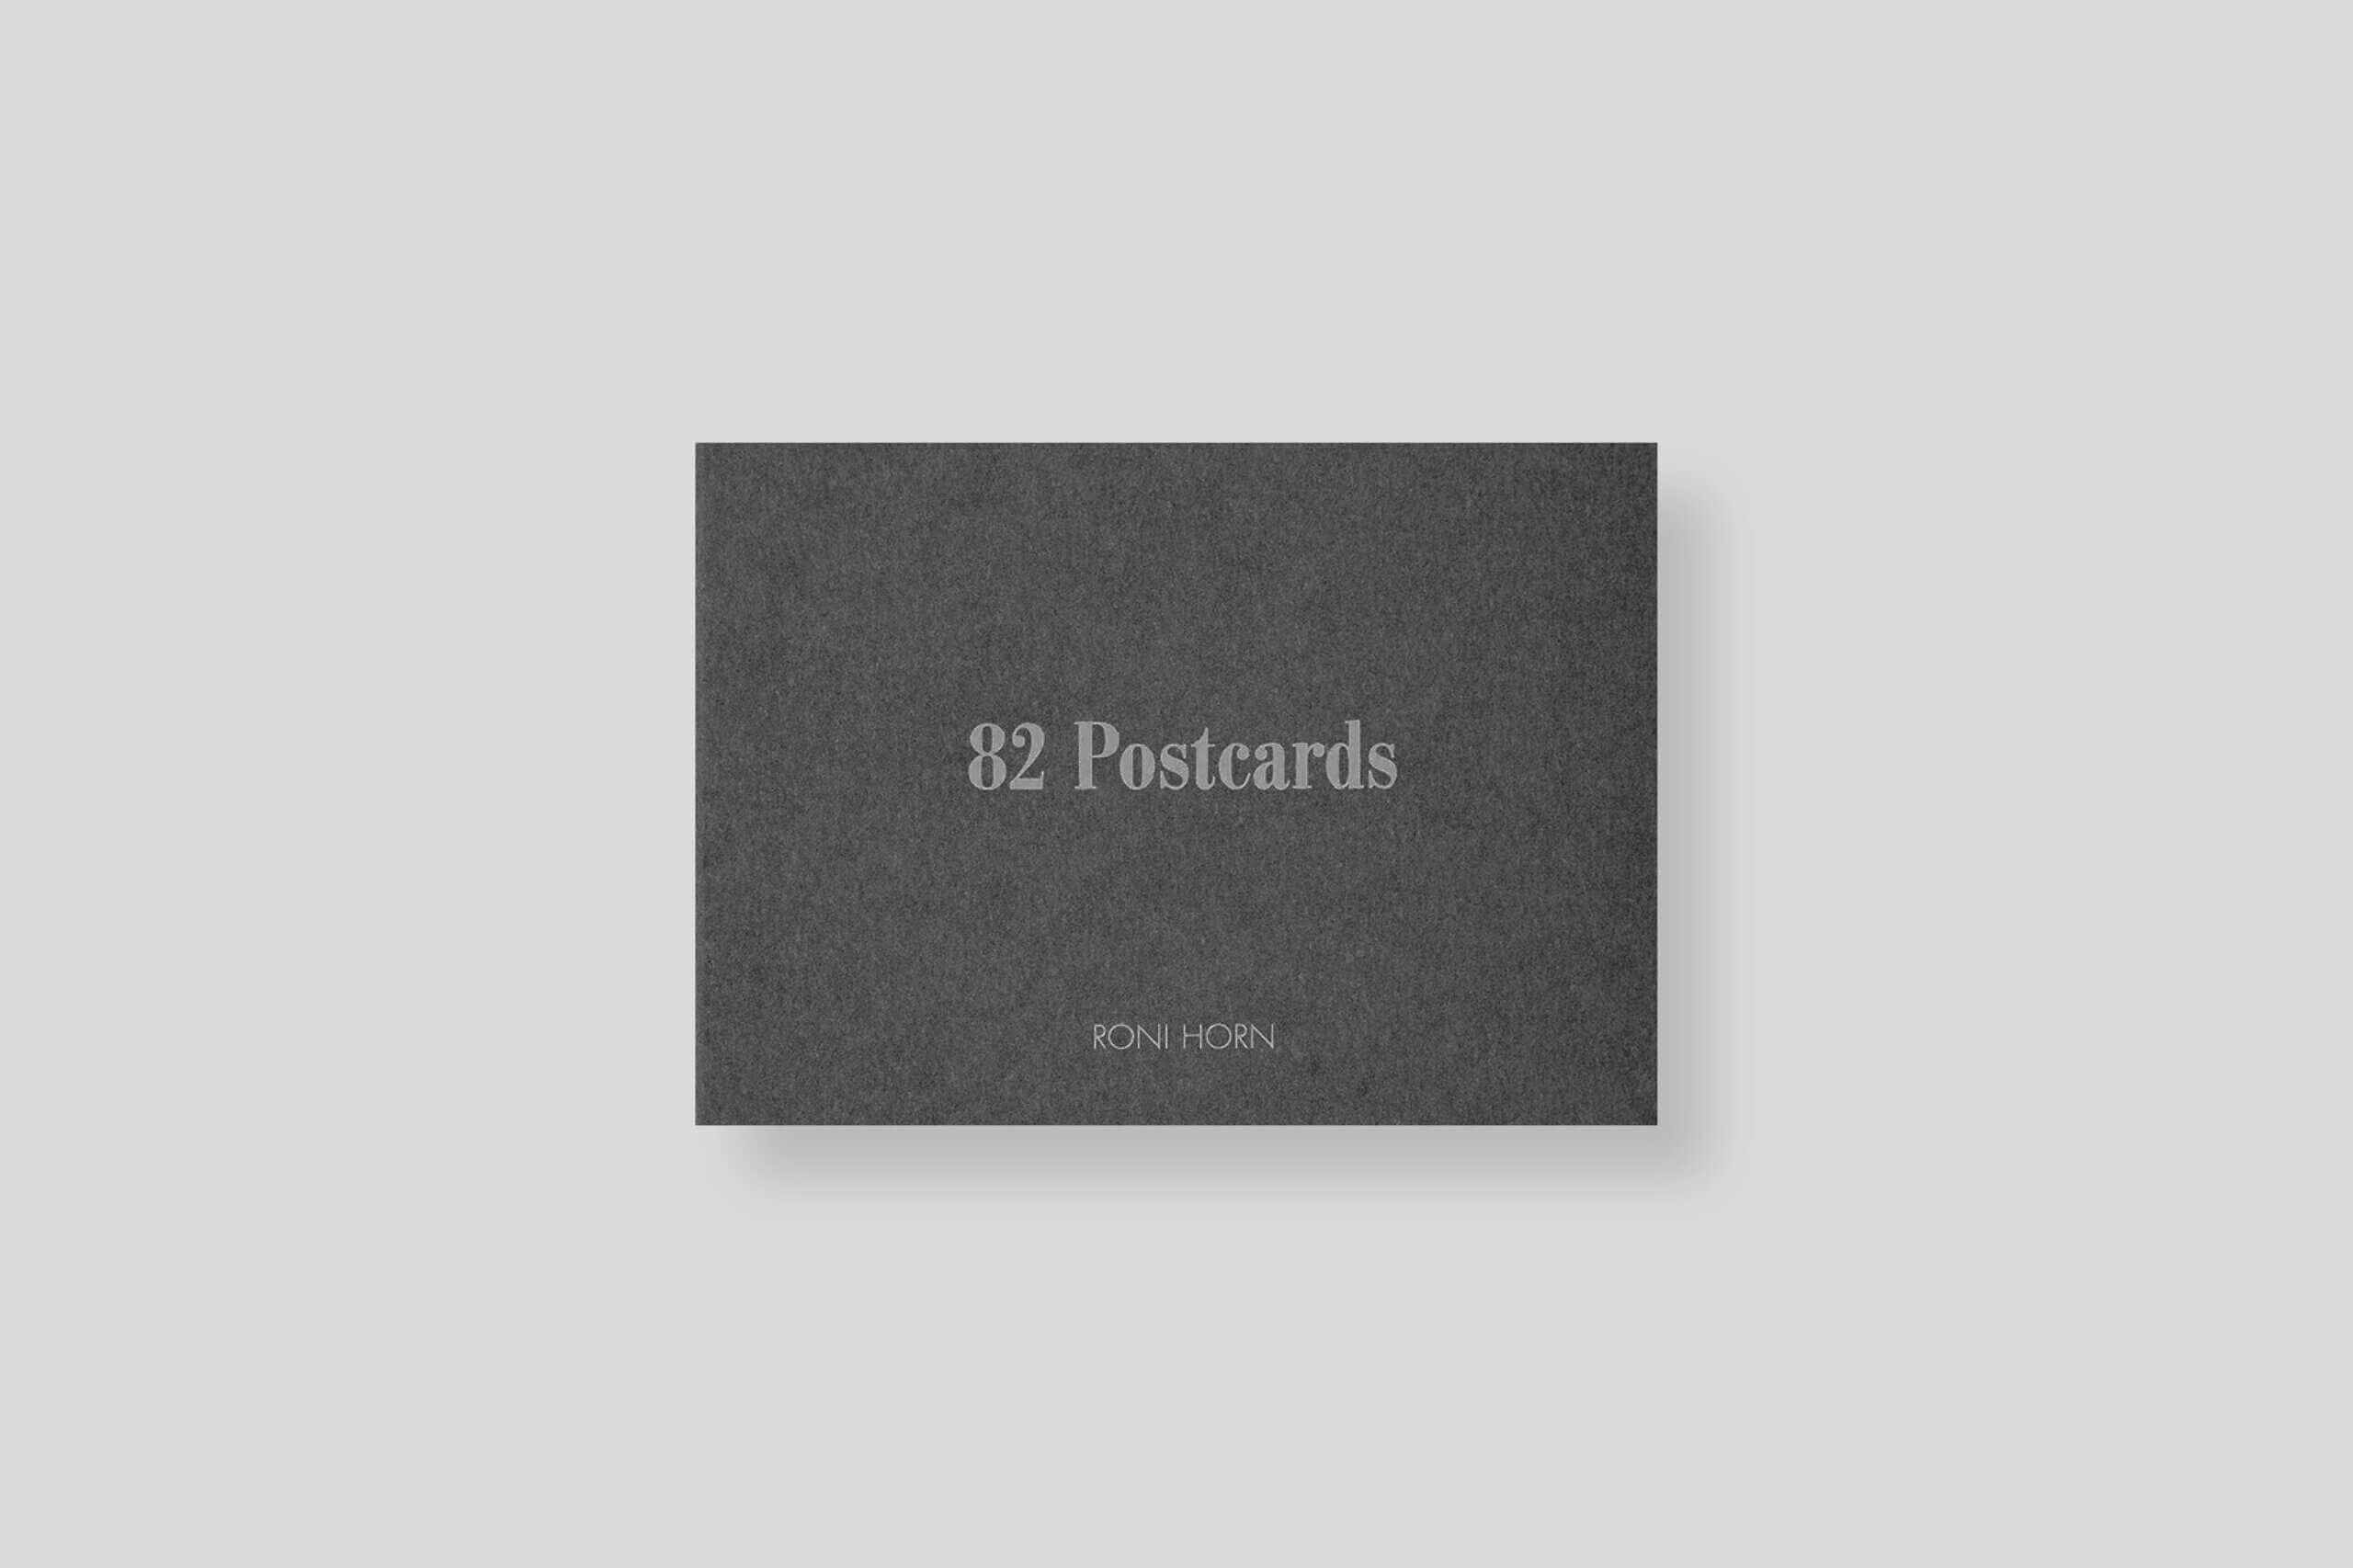 82-postcards-horn-hauser-wirth-cover